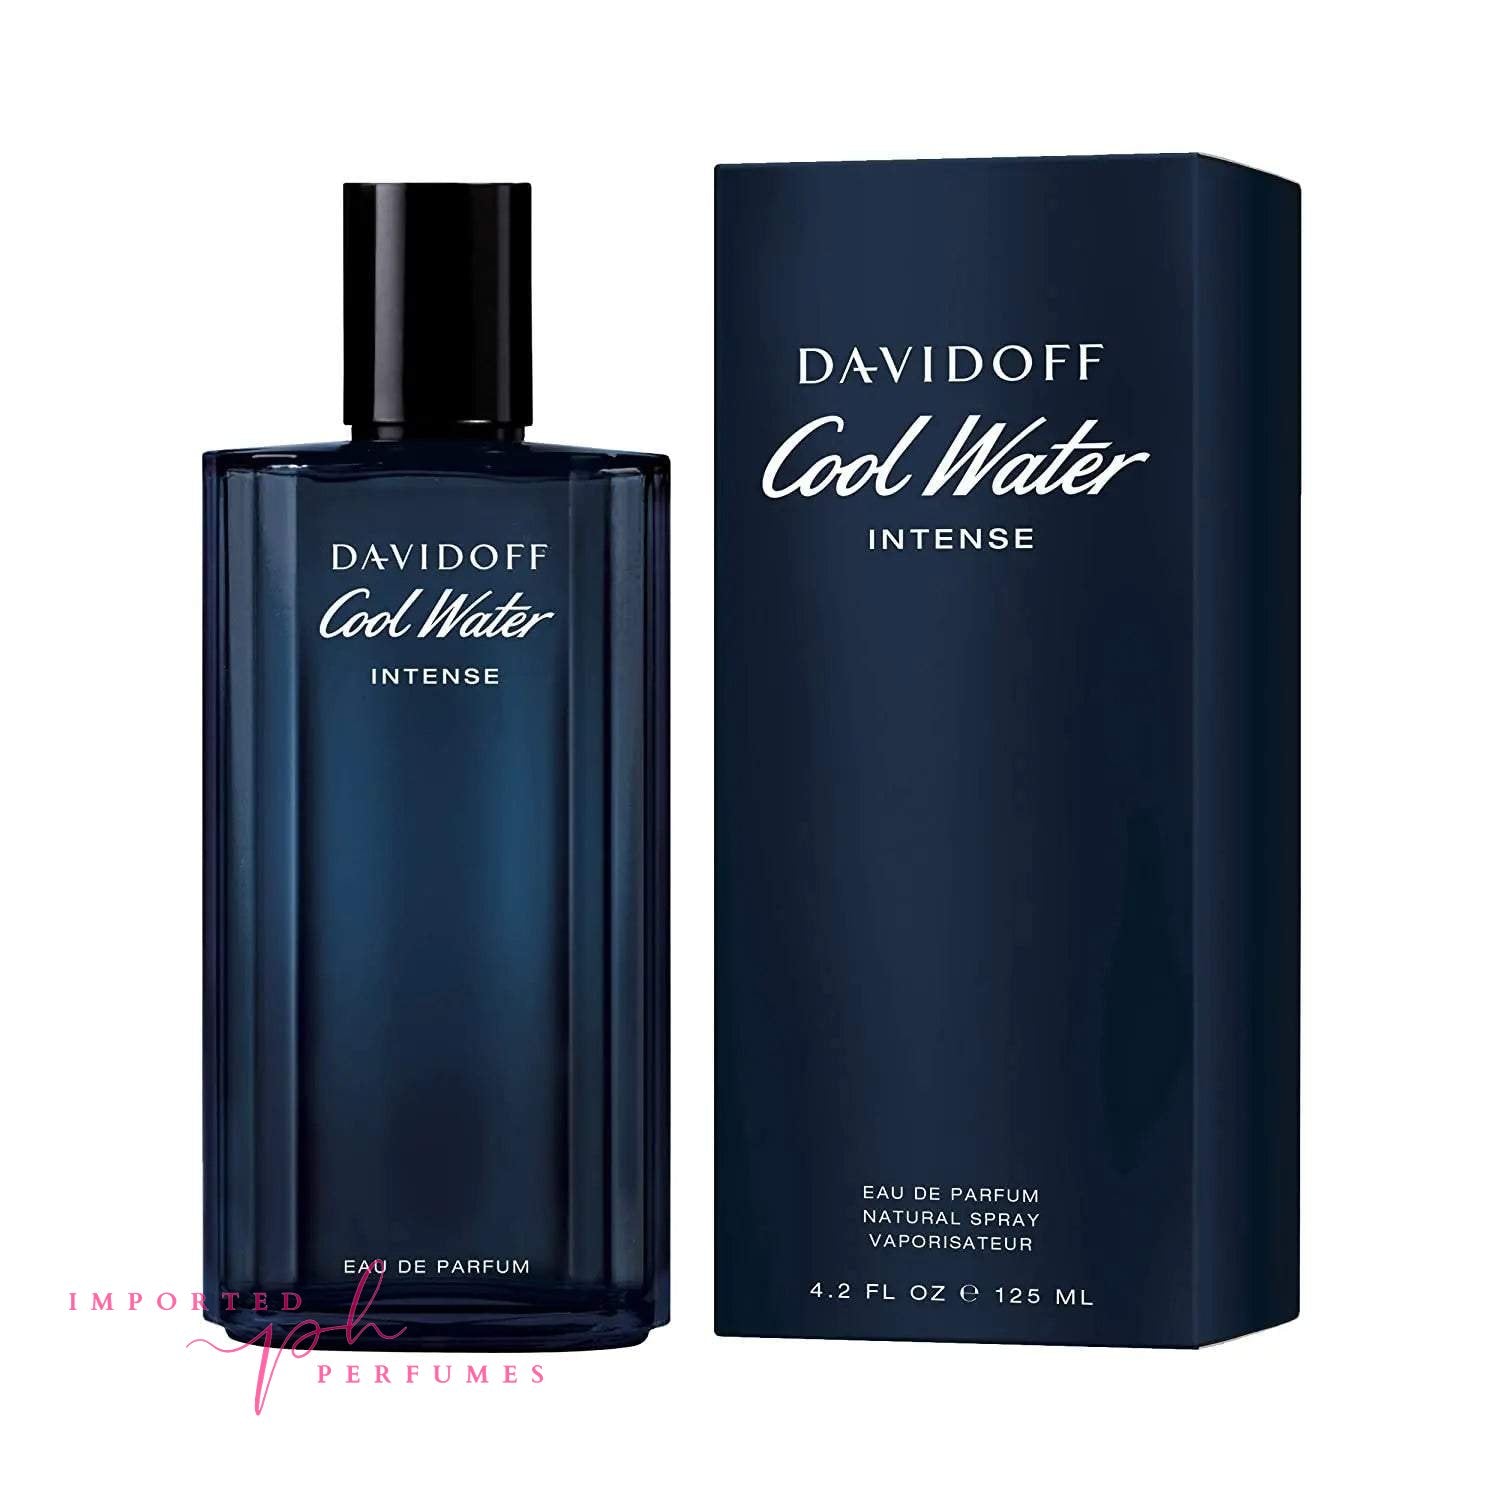 Cool Water Intense by Davidoff for Men Eau de Parfum 125ml-Imported Perfumes Co-cool water intense,Cool water men,david,Davidoff,men